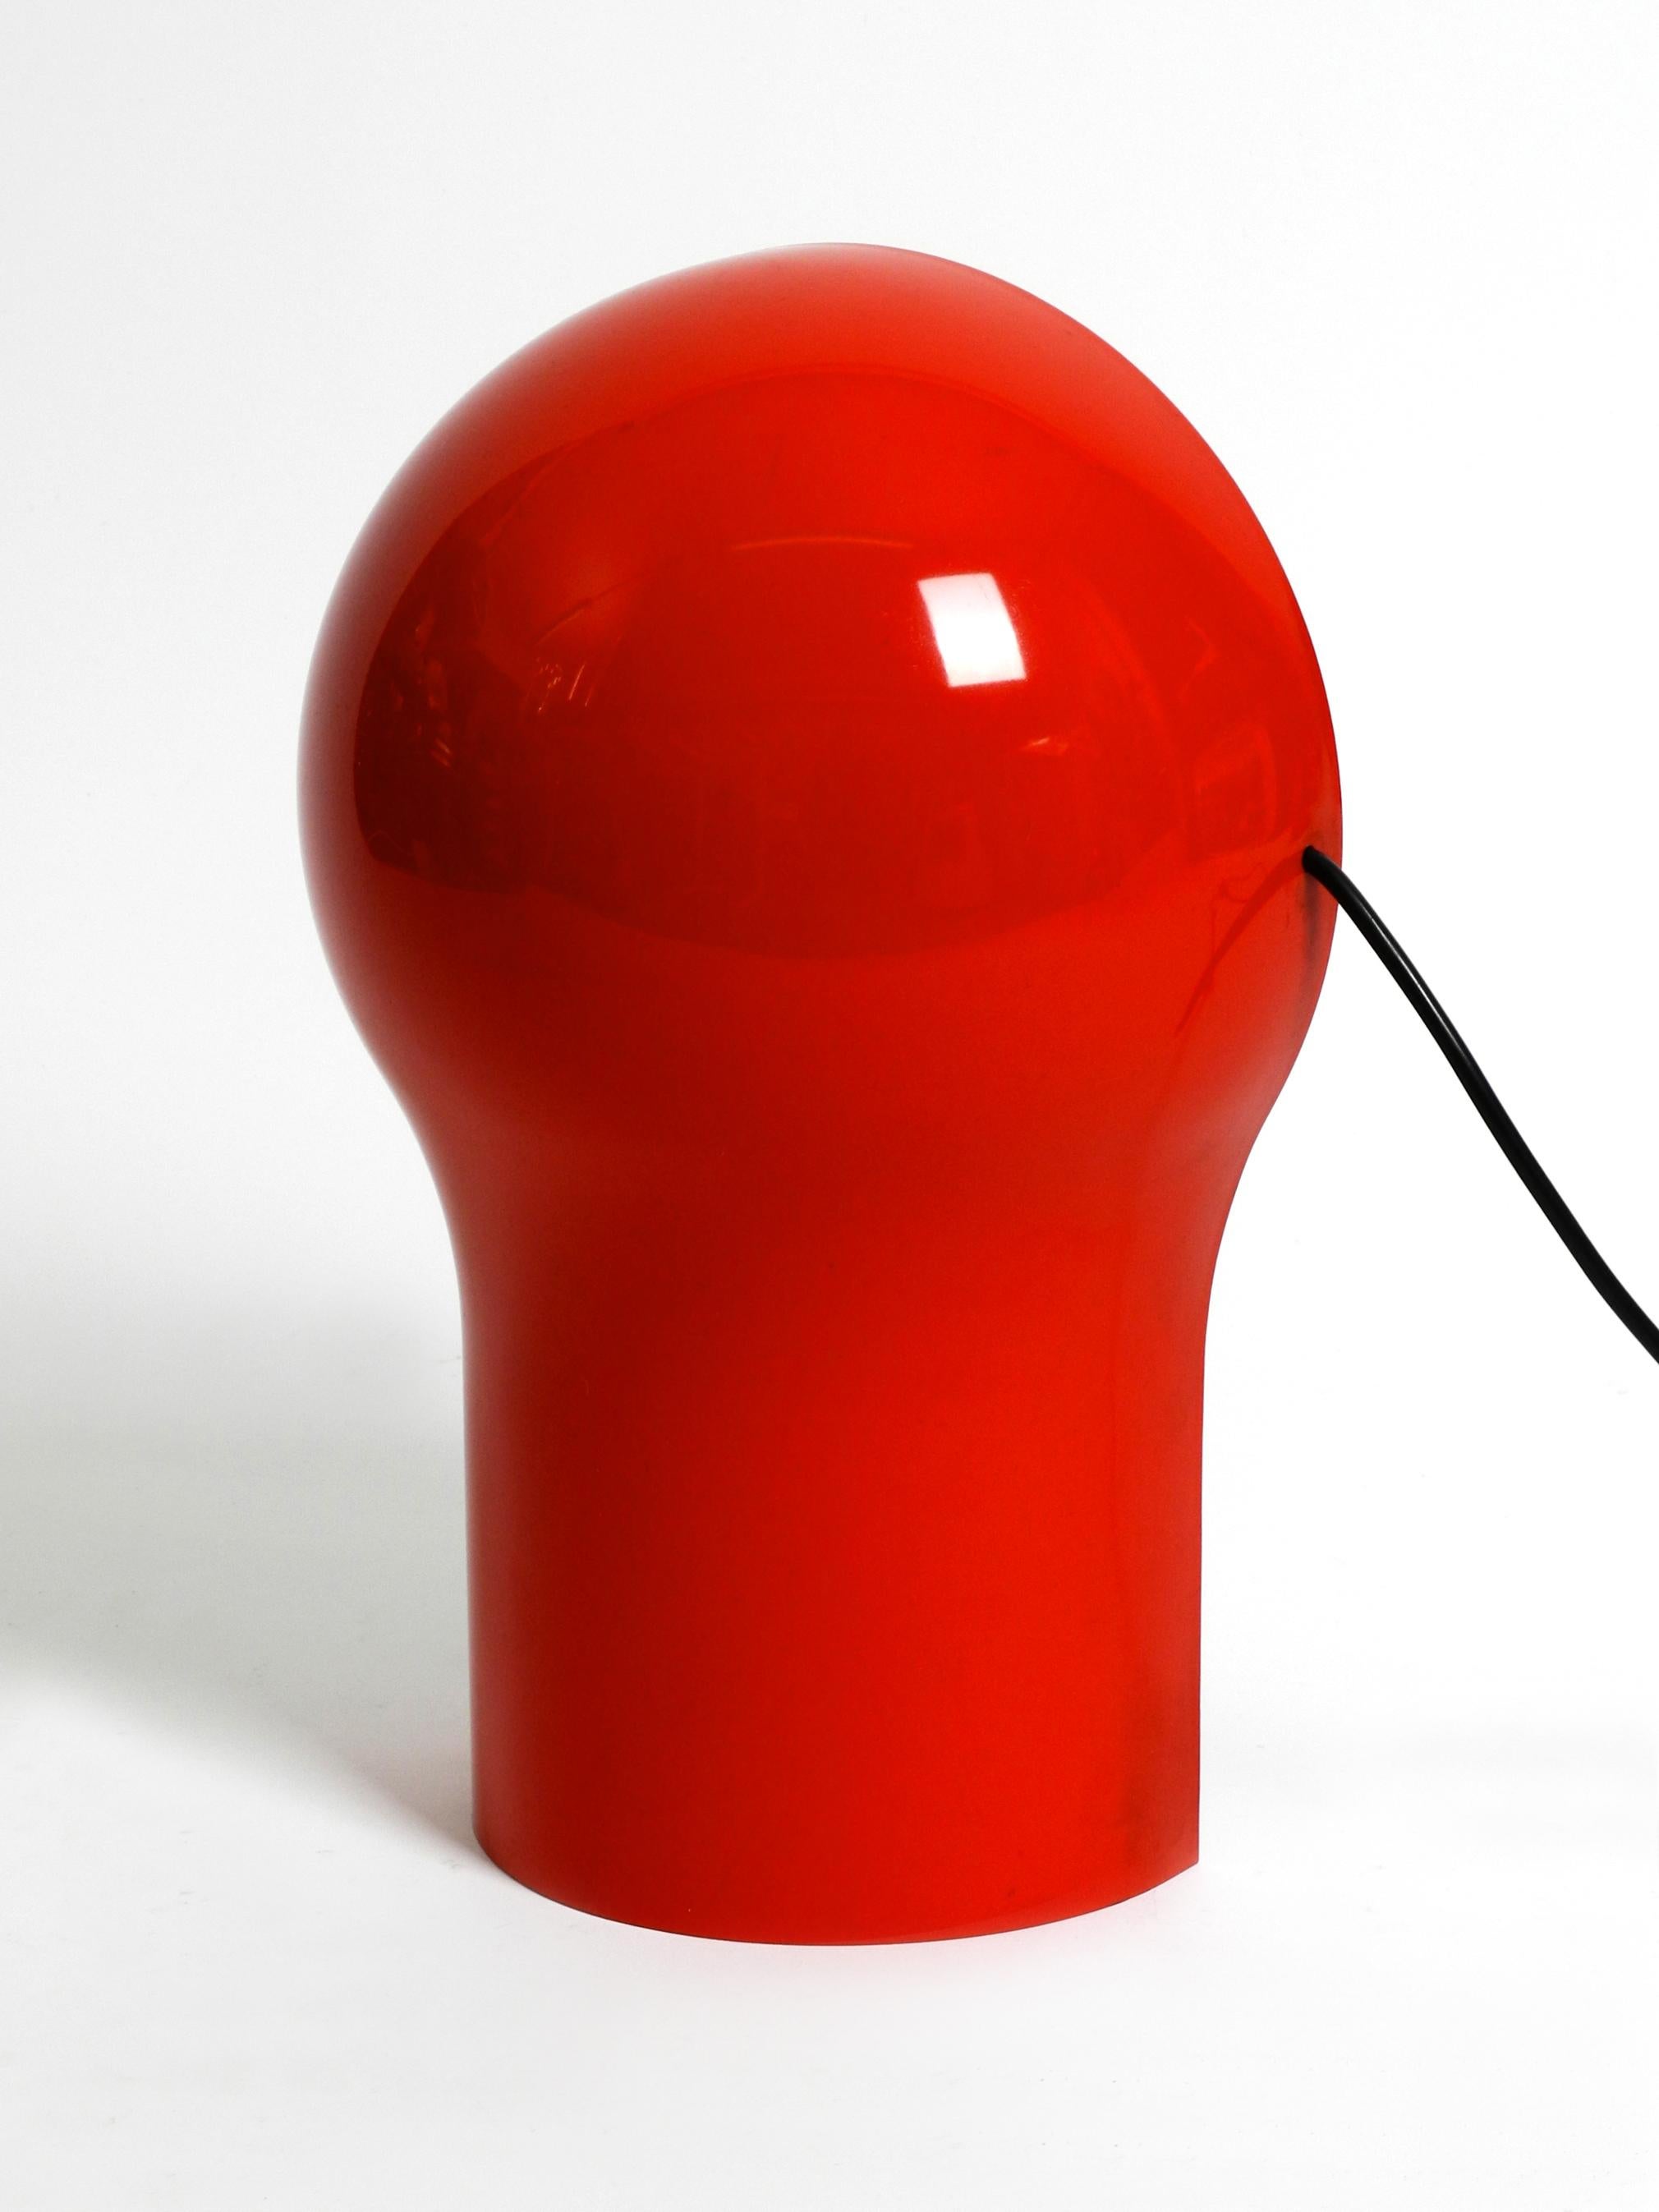 Mid-20th Century Telegono Table Lamp by Vico Magistretti for Artemide 1968 in Very Good Condition For Sale